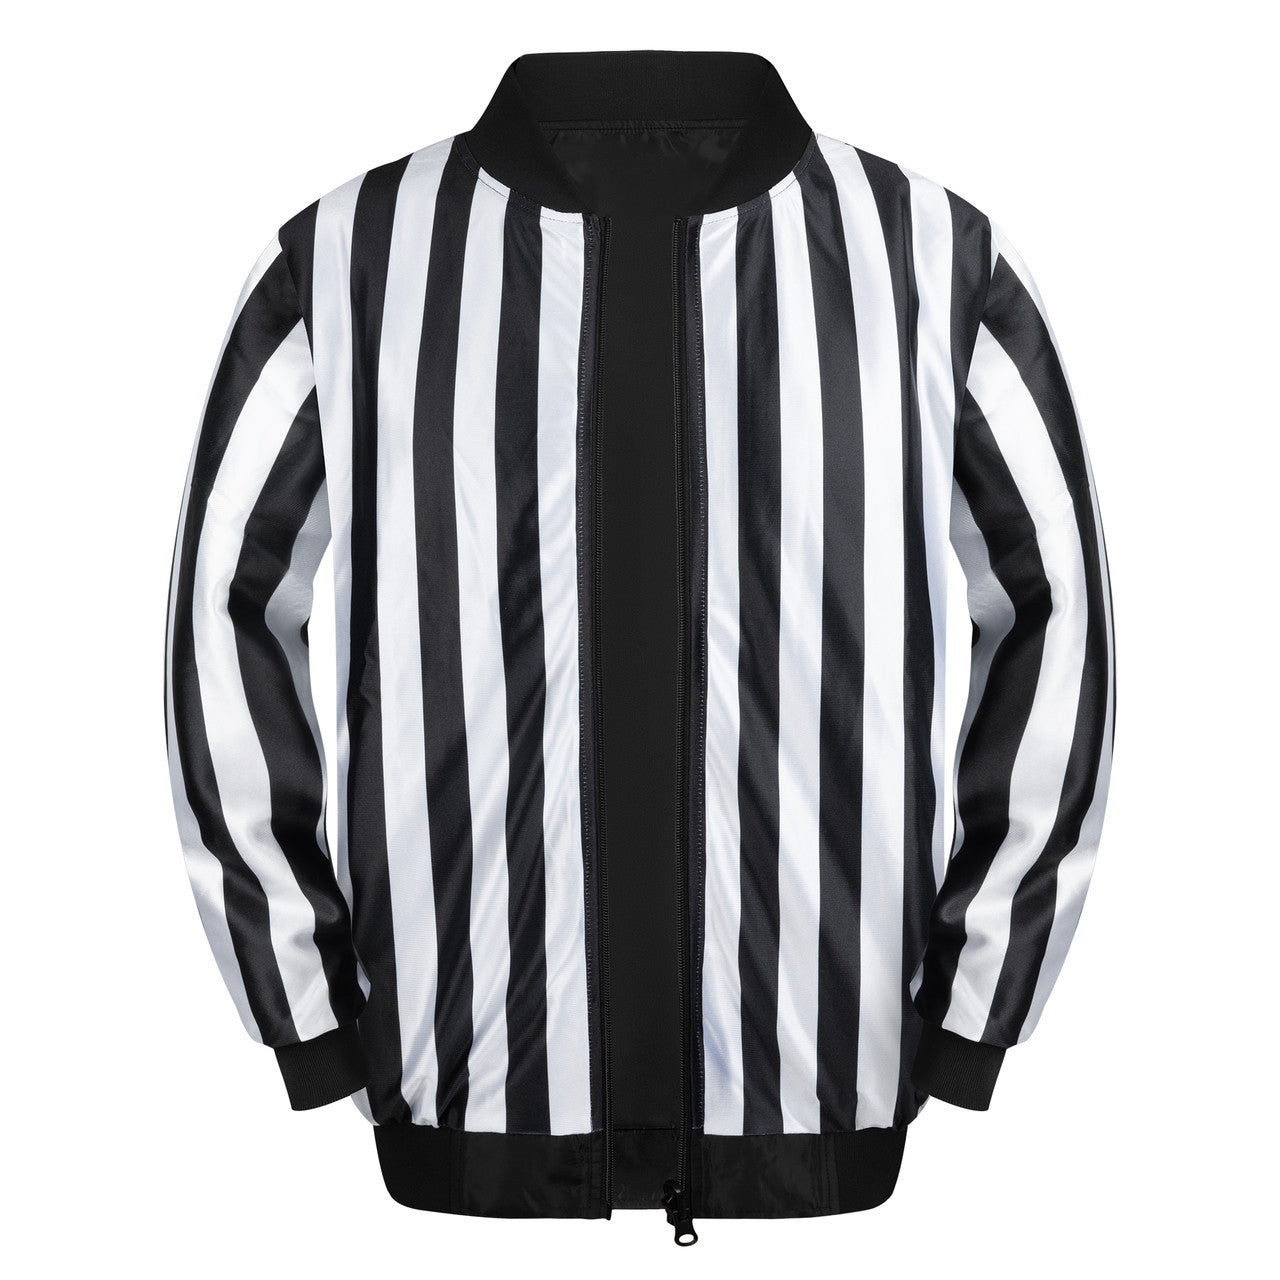 1" Stripe Reversible Referee Jacket for Lacrosse and Football